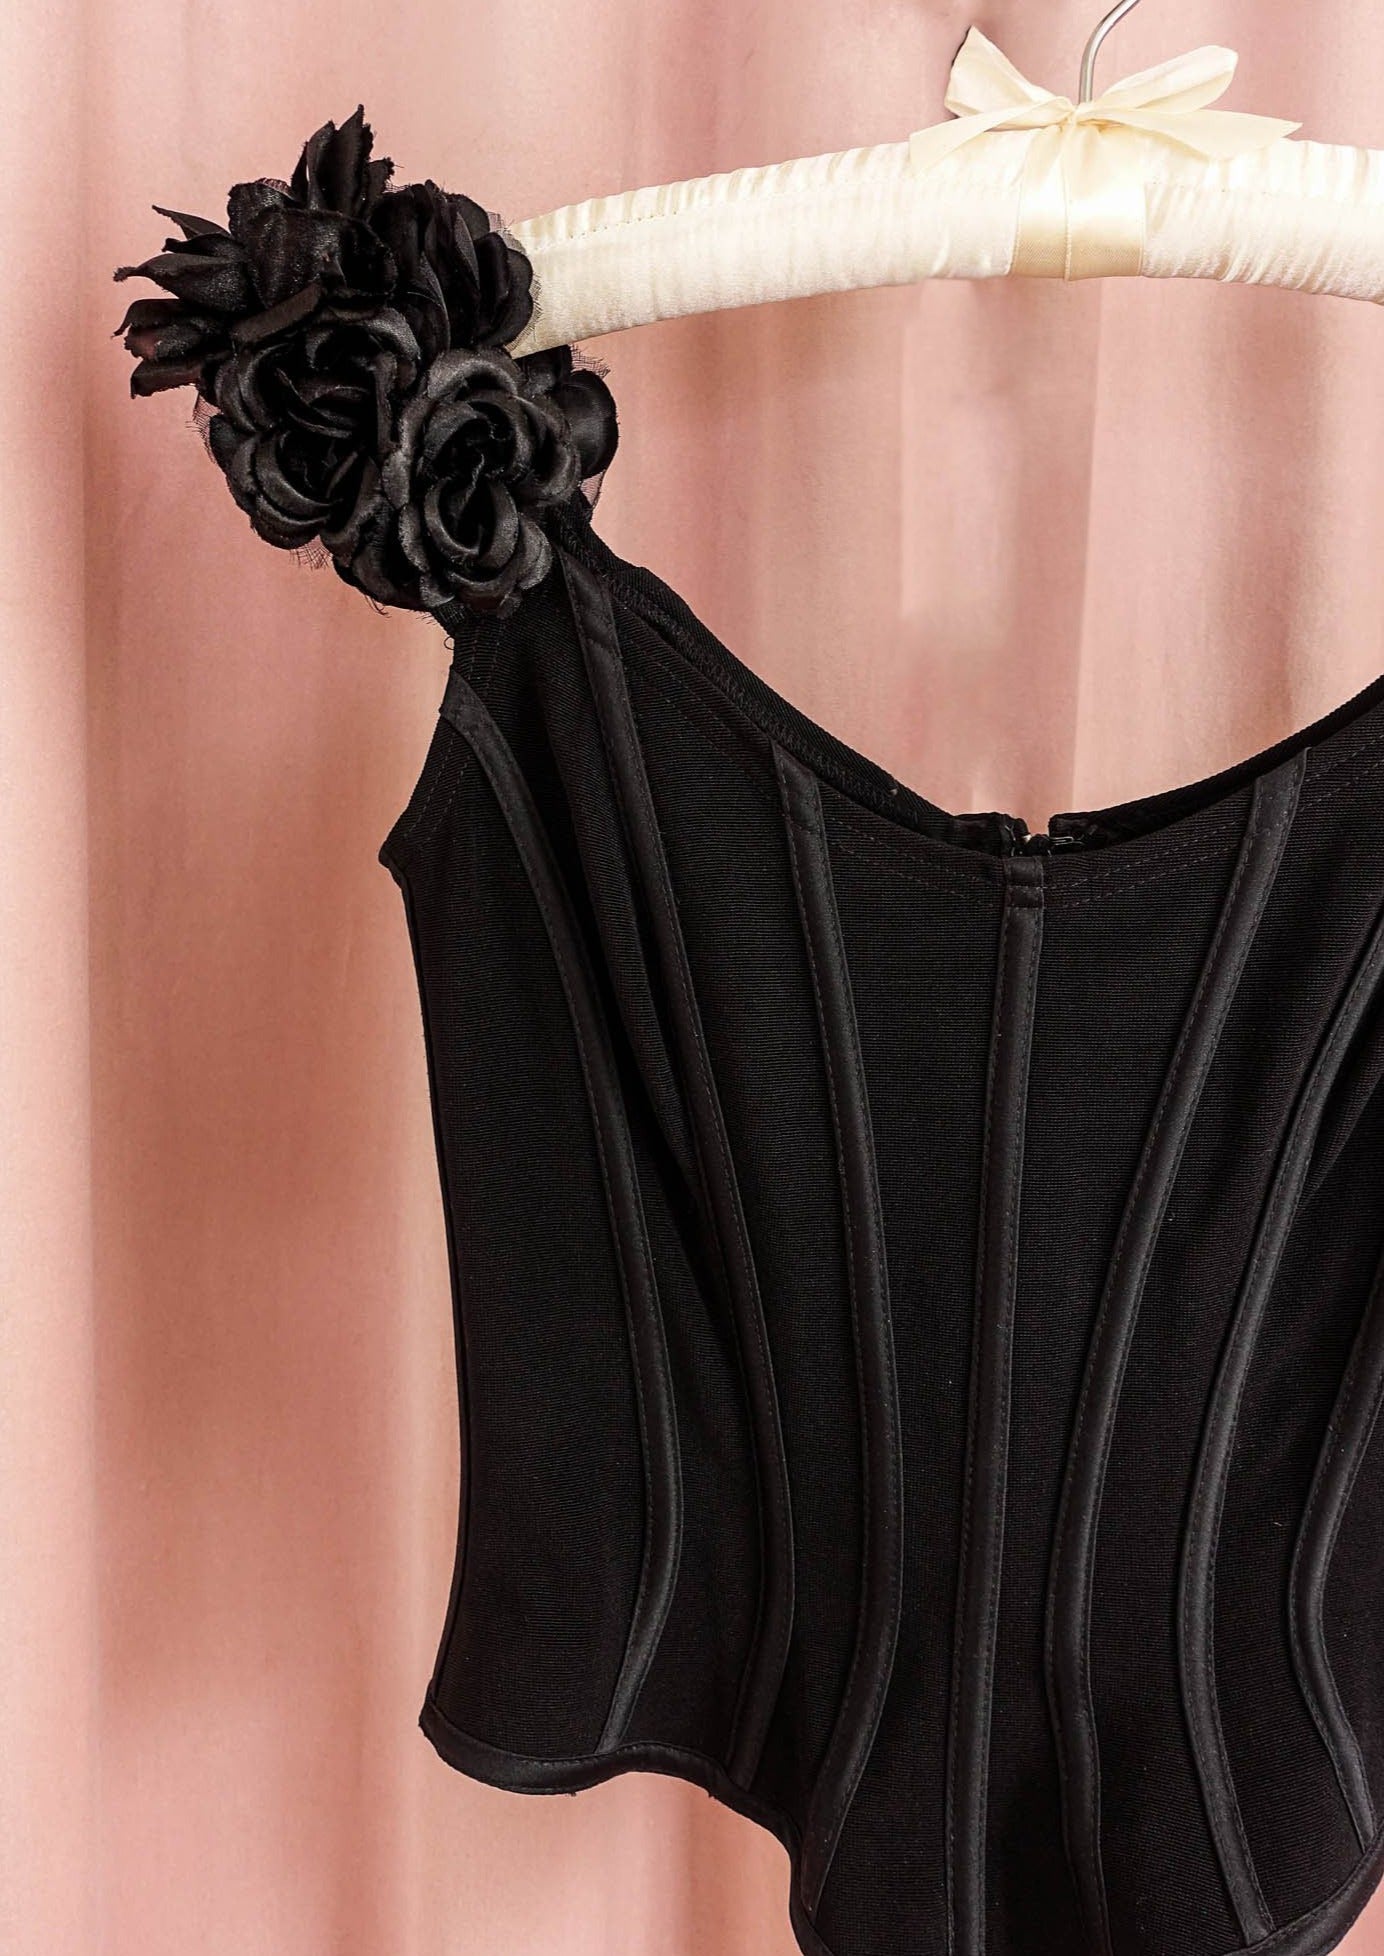 1990s Black Boned Corset With Rose Straps